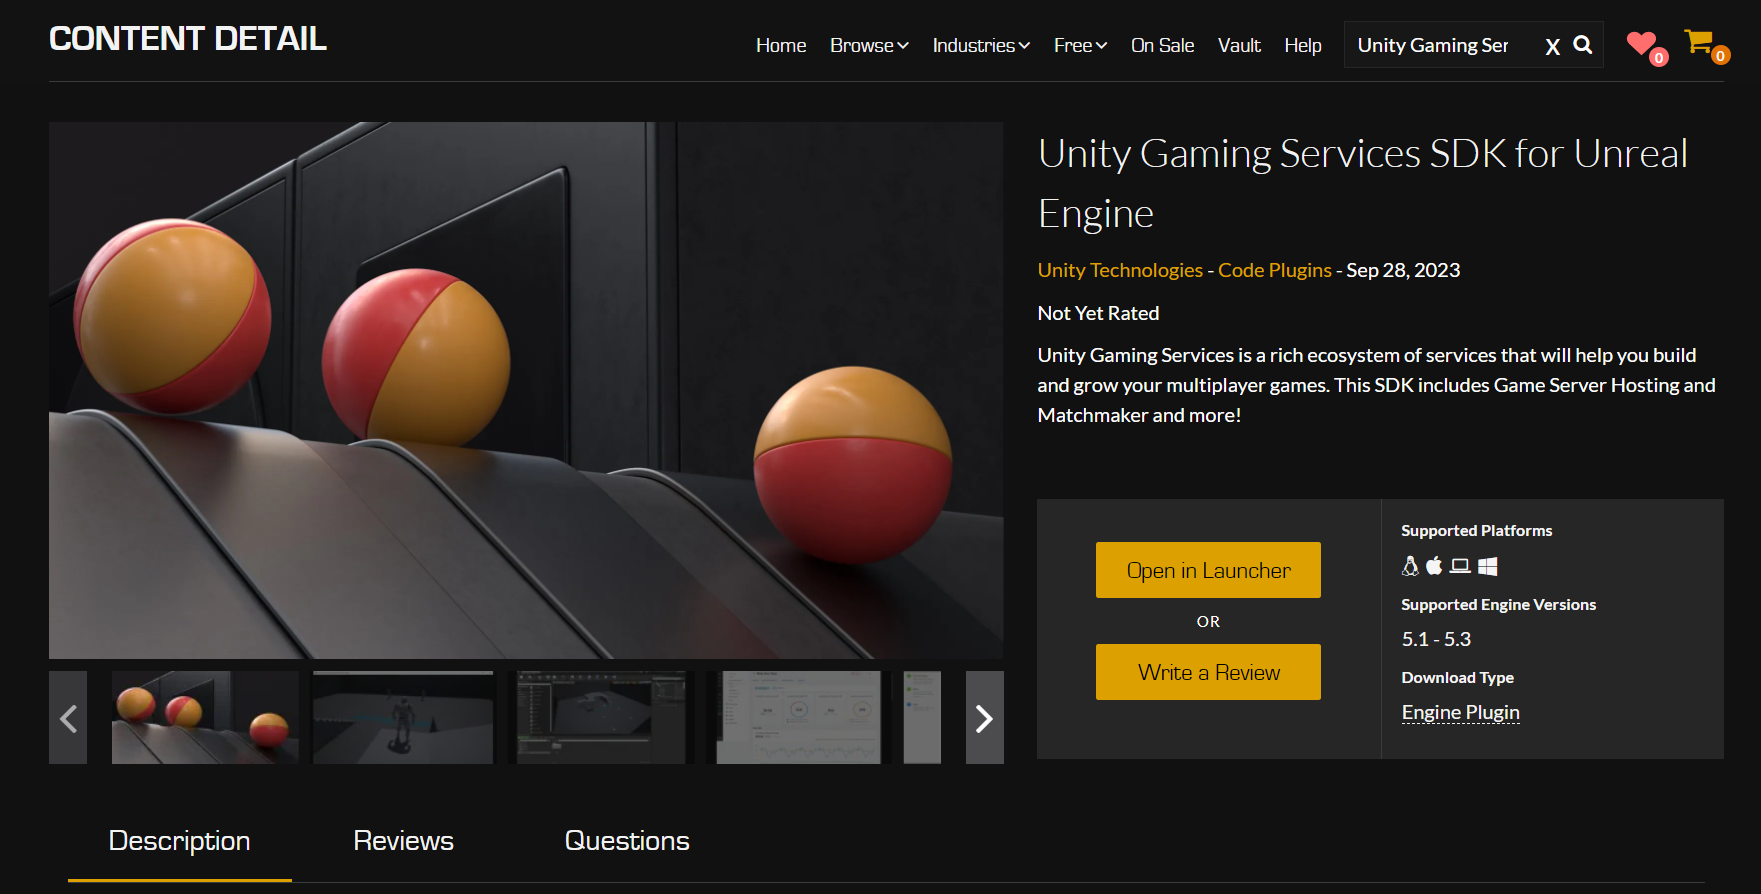 Unity Gaming Services SDK for Unreal Engine Marketplace page